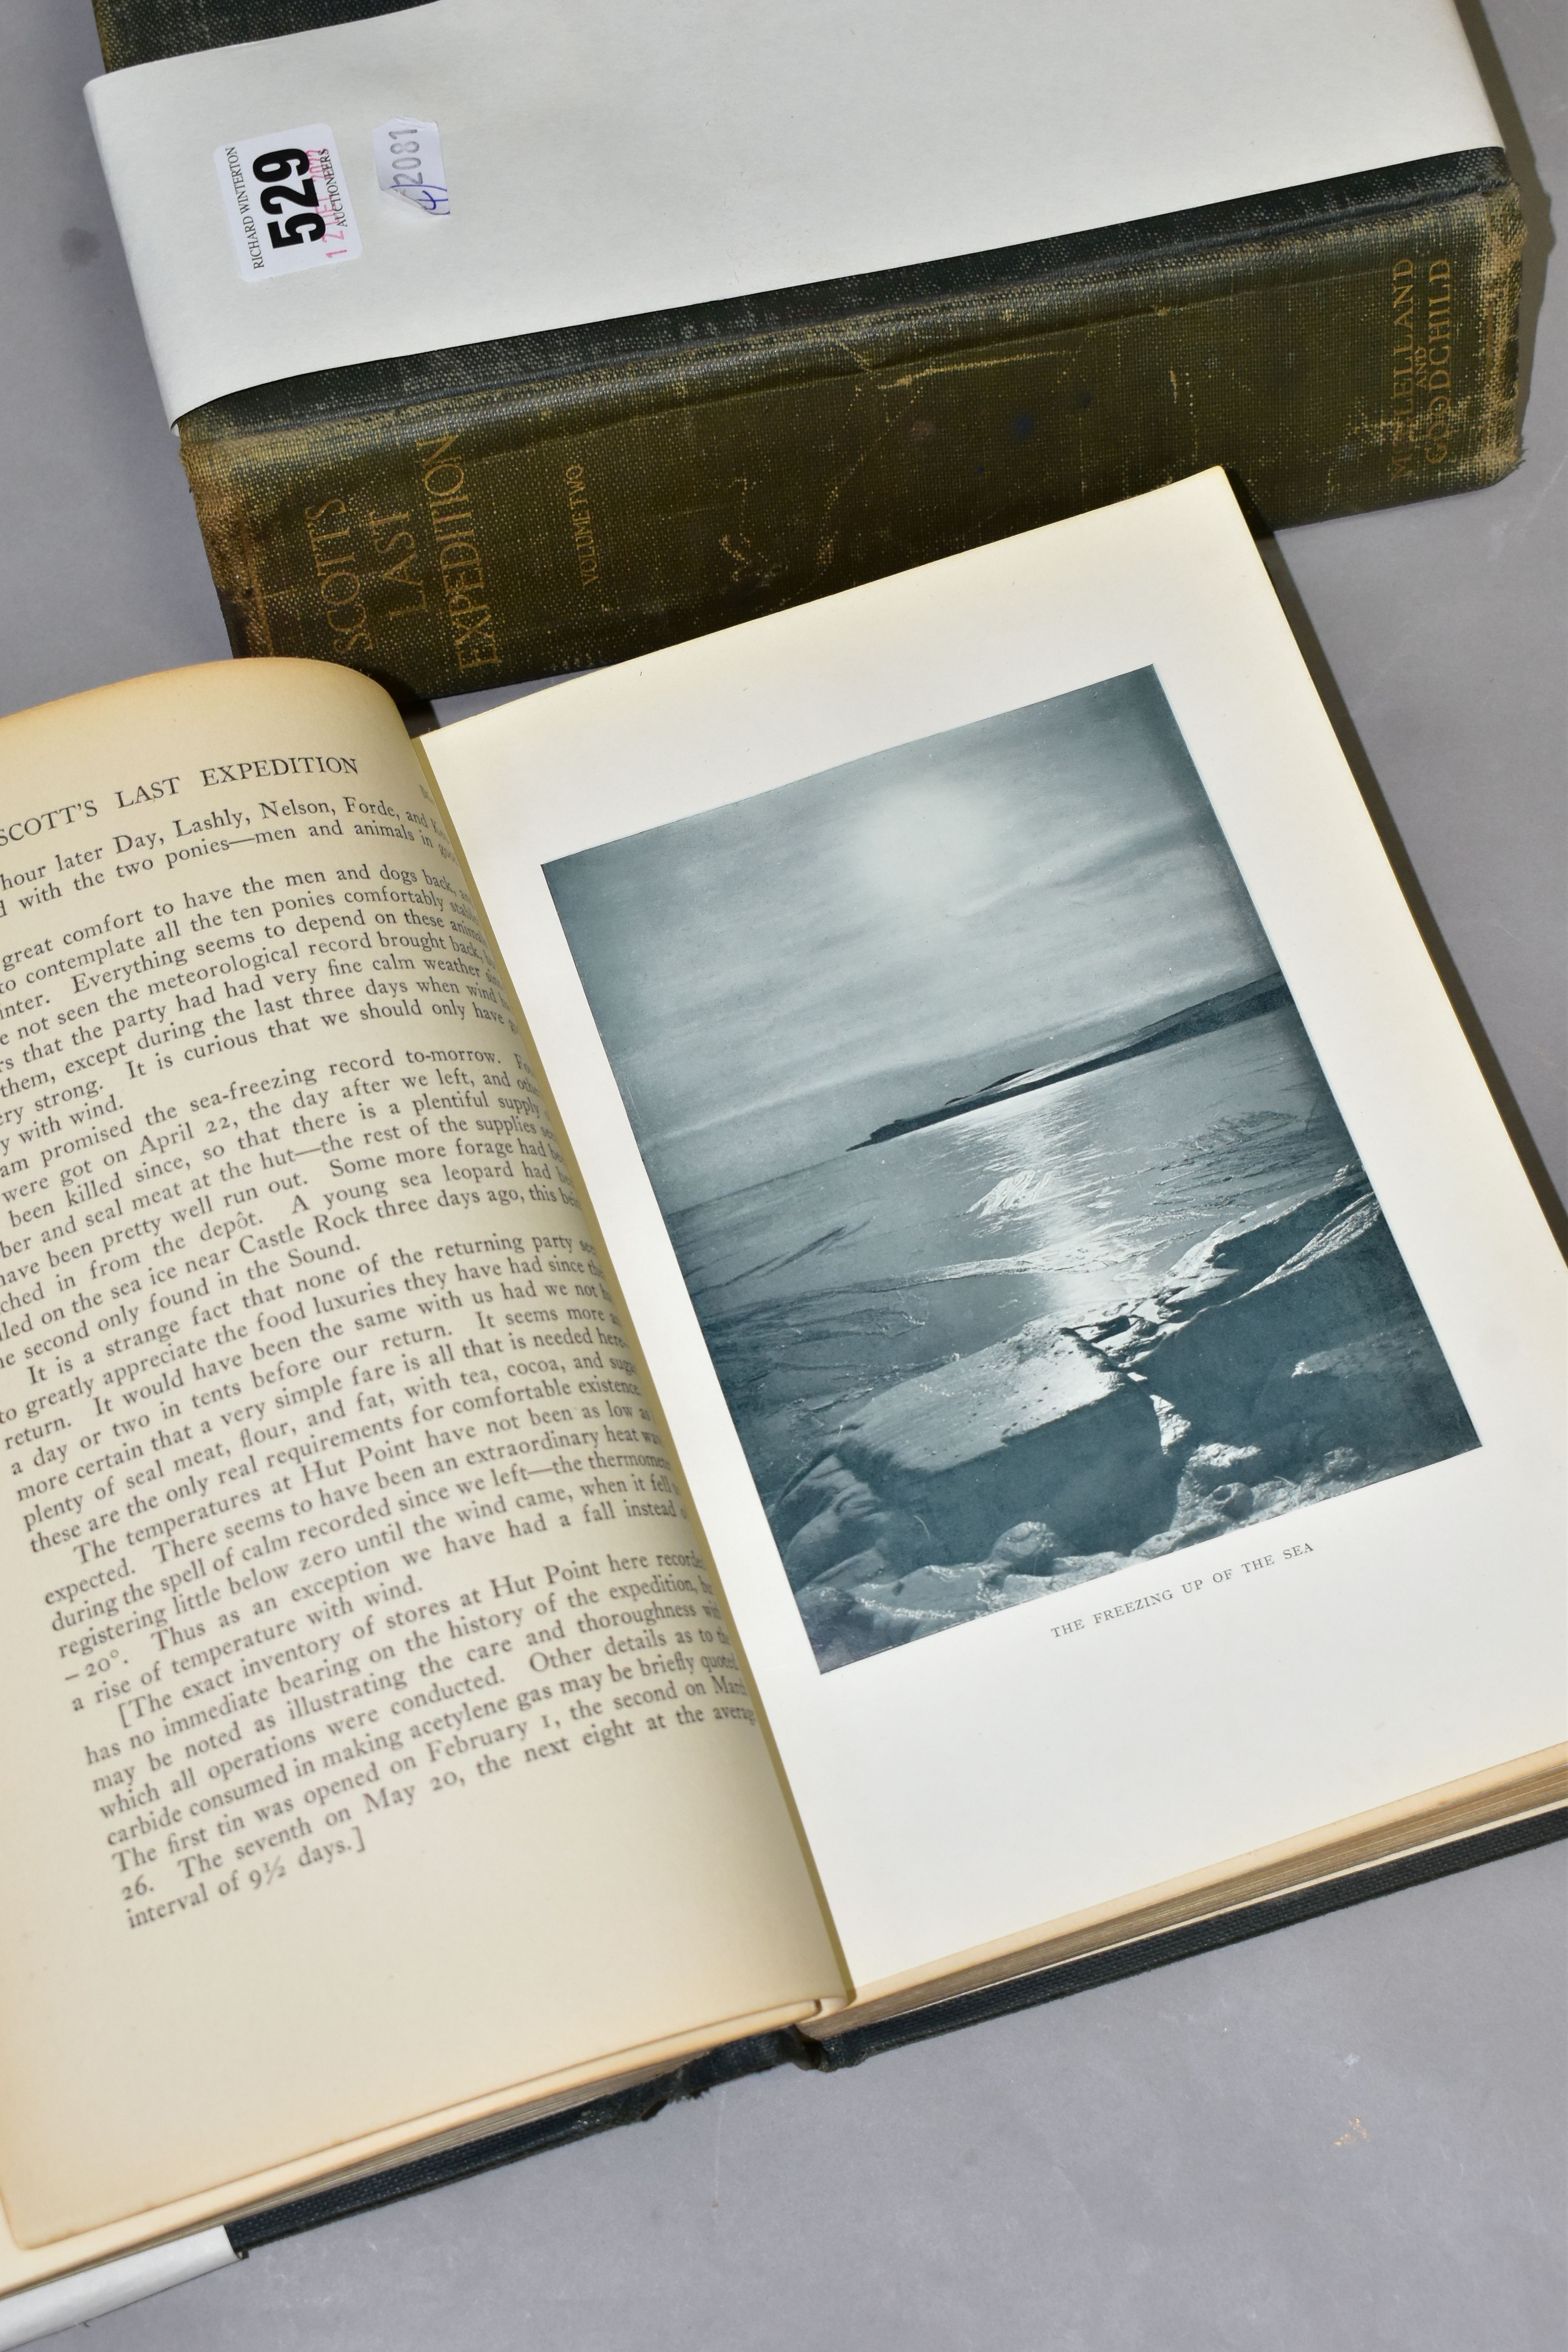 SCOTT'S LAST EXPEDITION, Vols.1 & 2, American 1st Edition published by McClellend and Goodchild, - Image 7 of 12